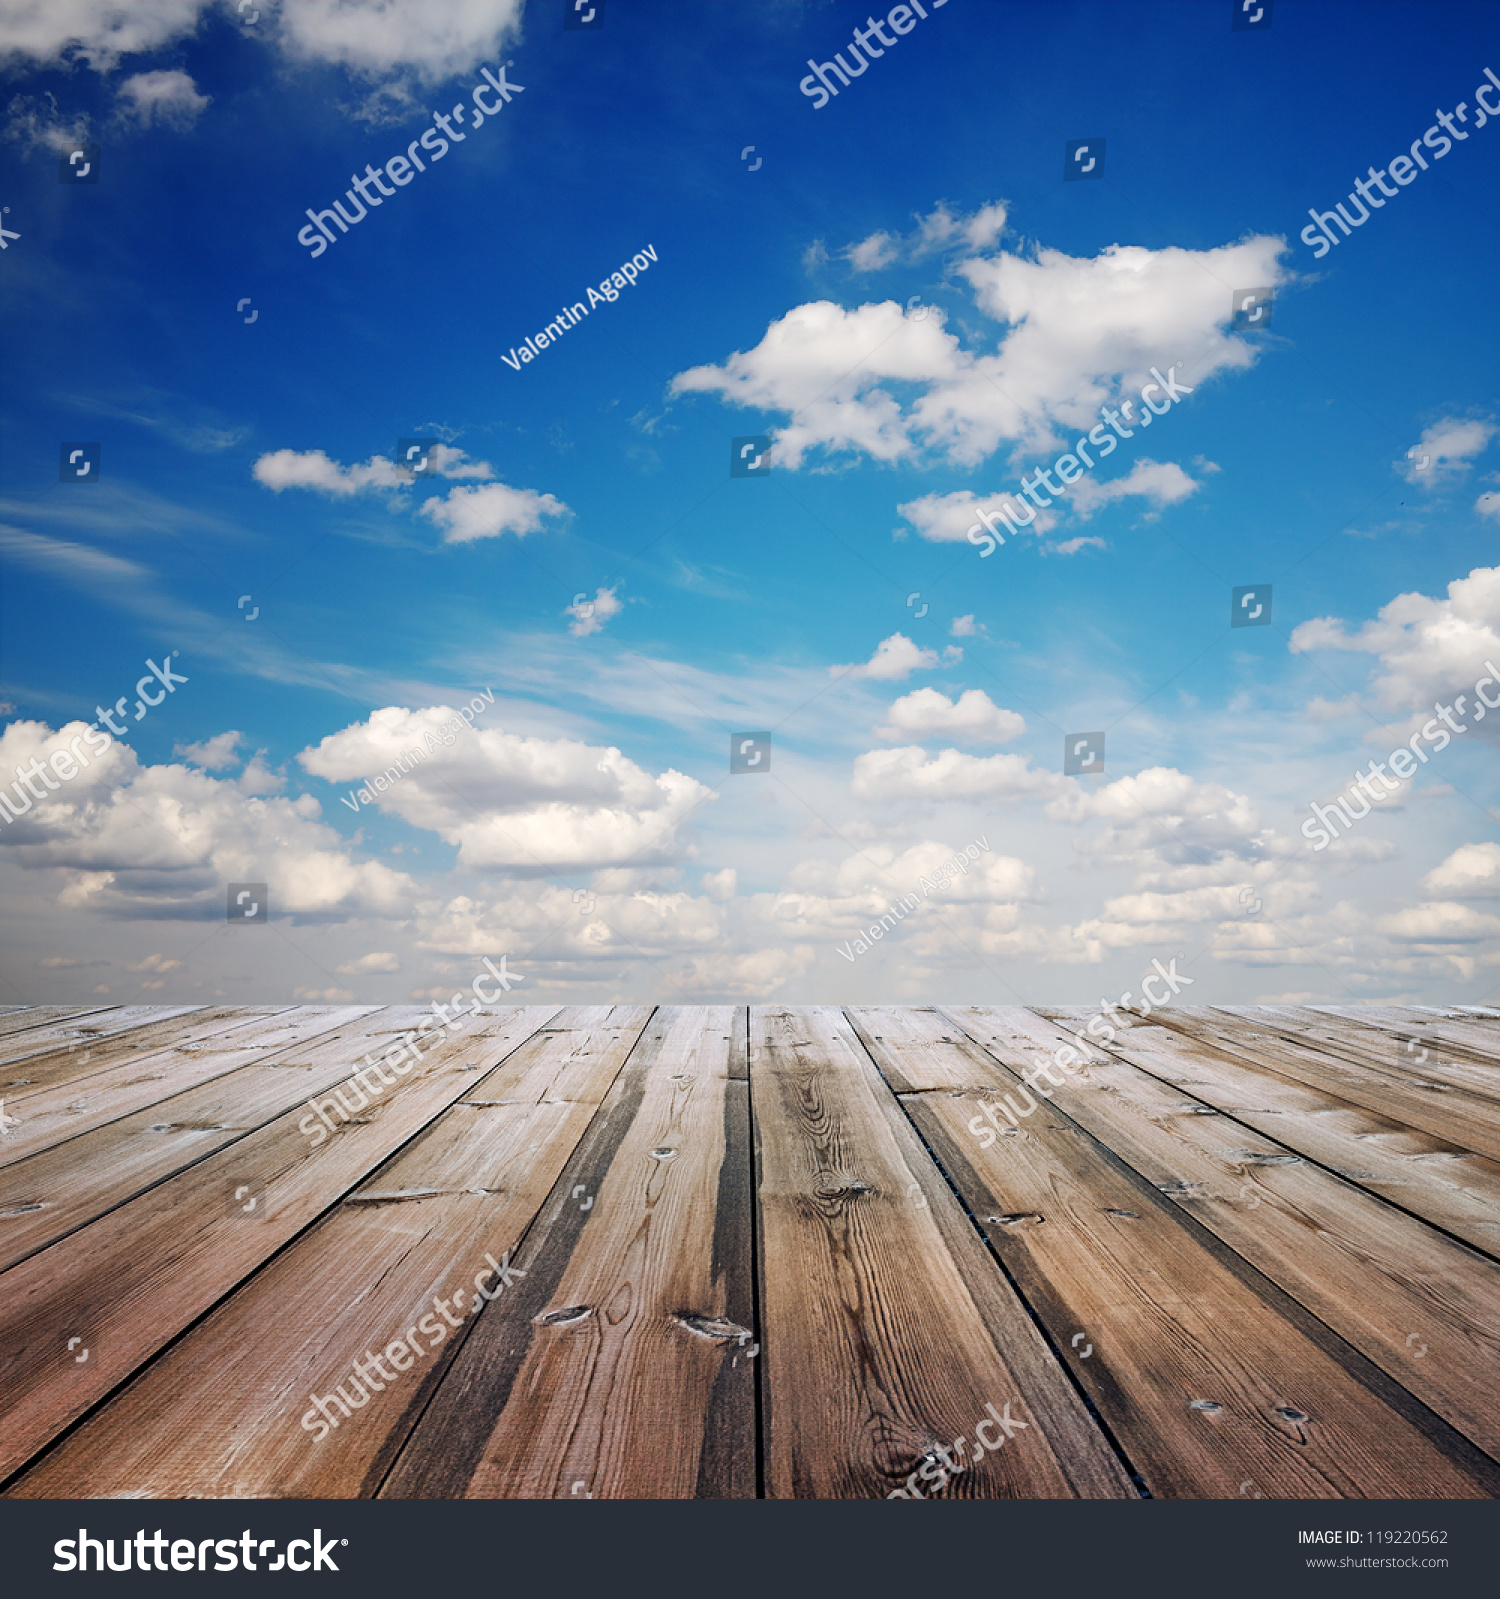 Sunset Sky And Wood Floor Background Stock Photo 119220562 Shutterstock